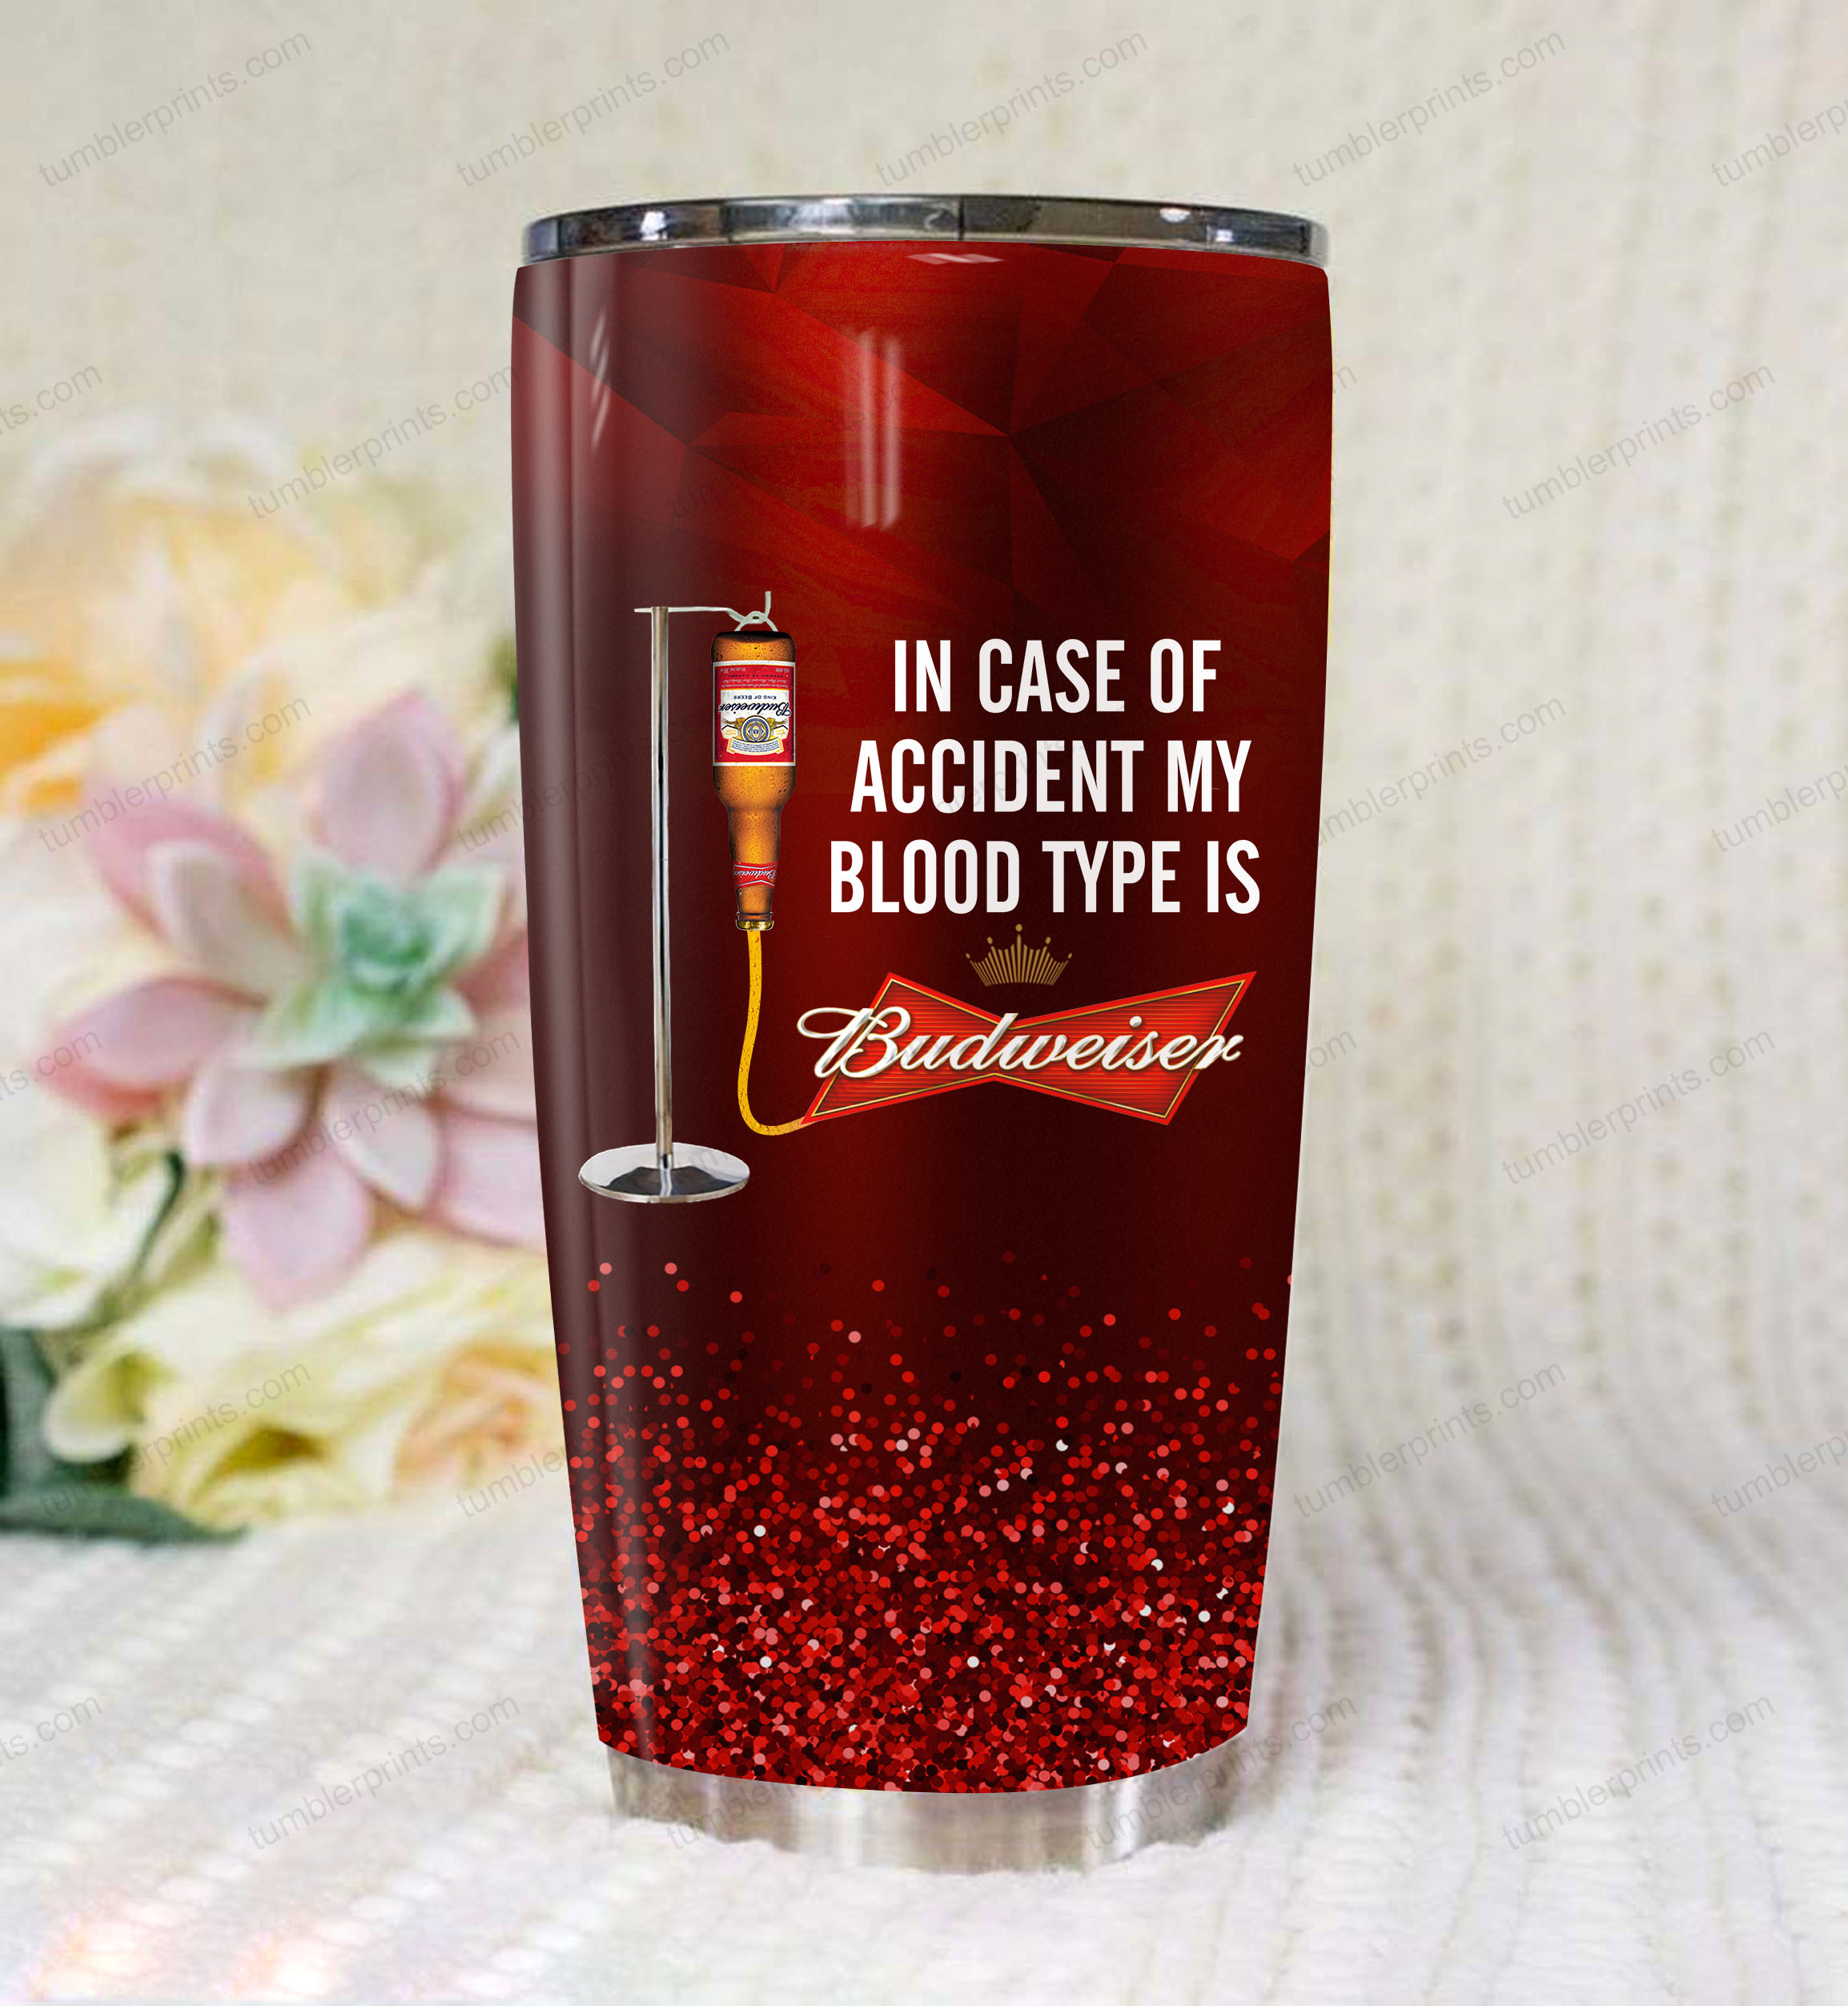 In case of an accident my blood type is budweiser full printing tumbler 3